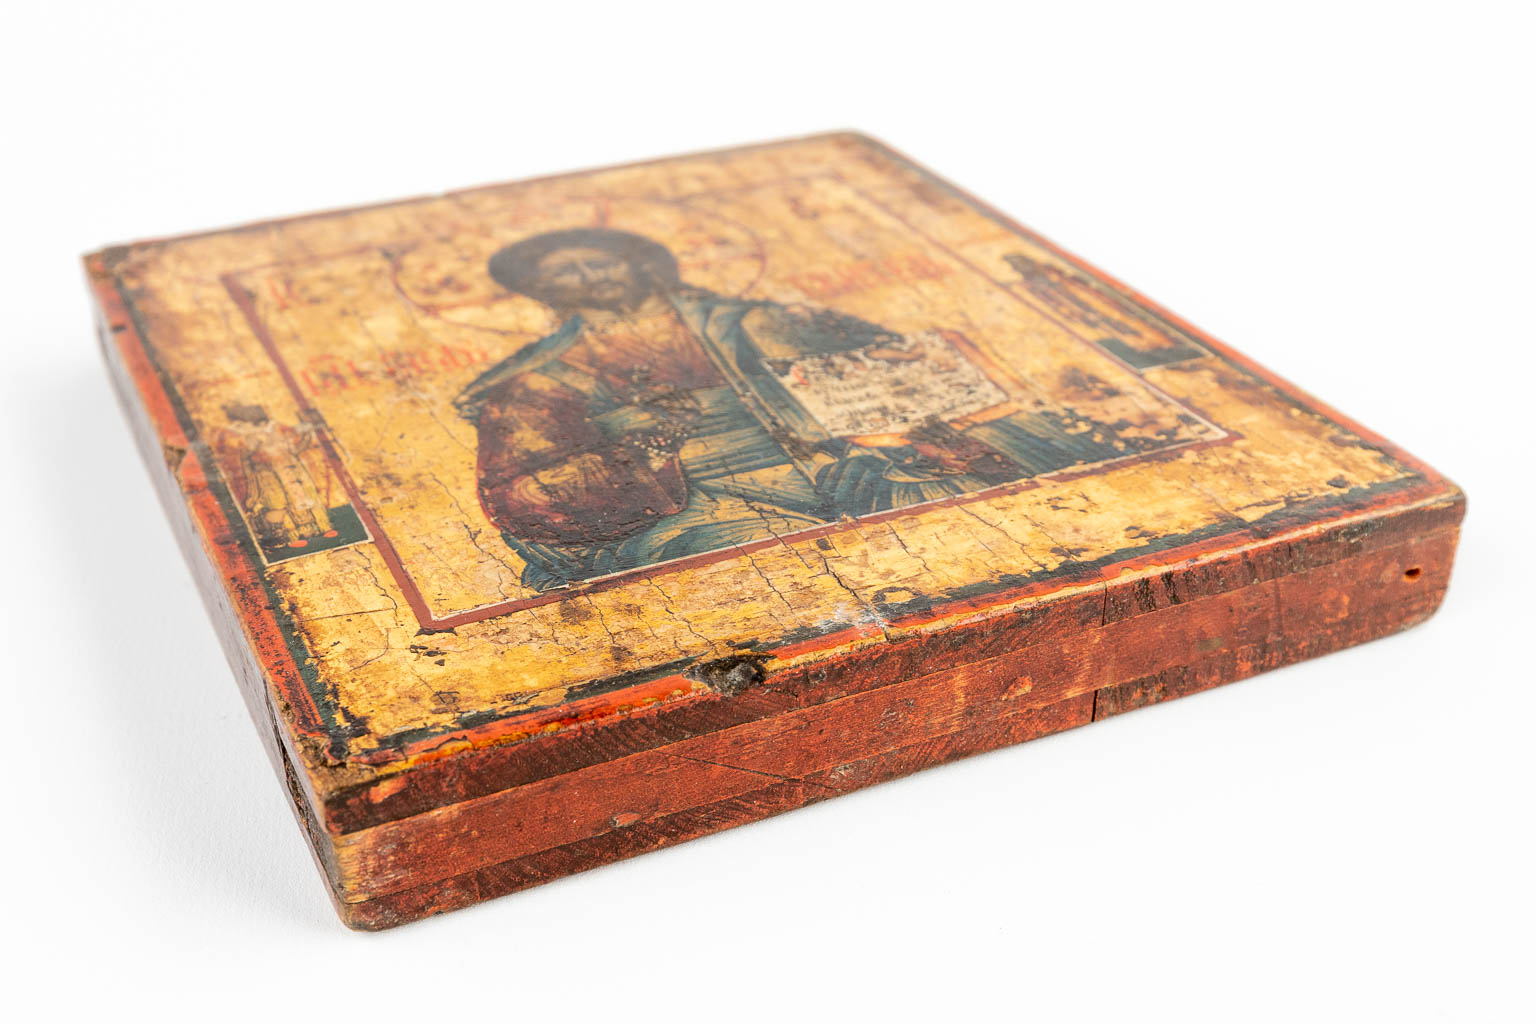 A small Eastern European icon of Jesus Christ, mounted in a gilt frame. 19th C. (W:21,5 x H:25 cm)